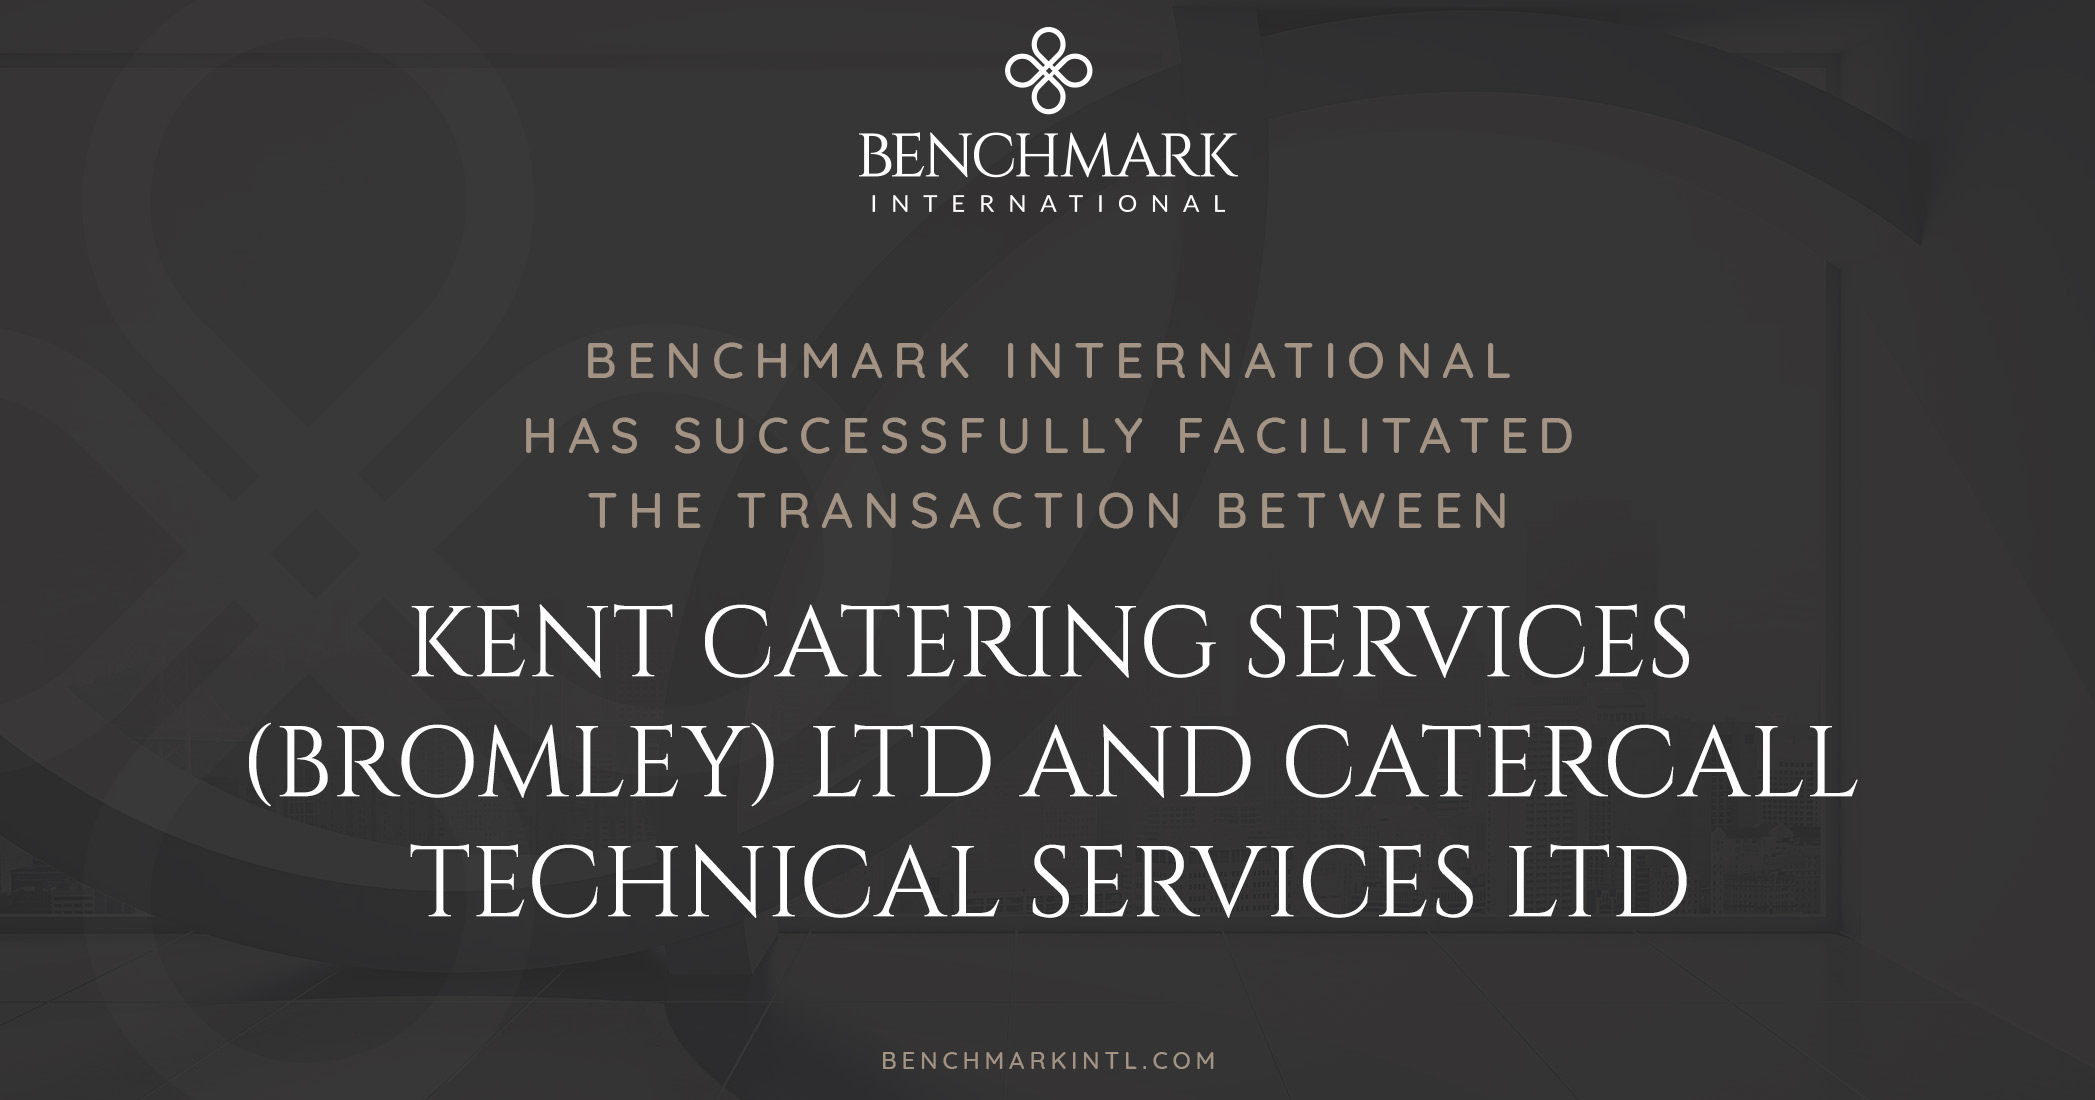 Benchmark International has Successfully Facilitated the Transaction Between Kent Catering Services (Bromley) Ltd and Catercall Ltd